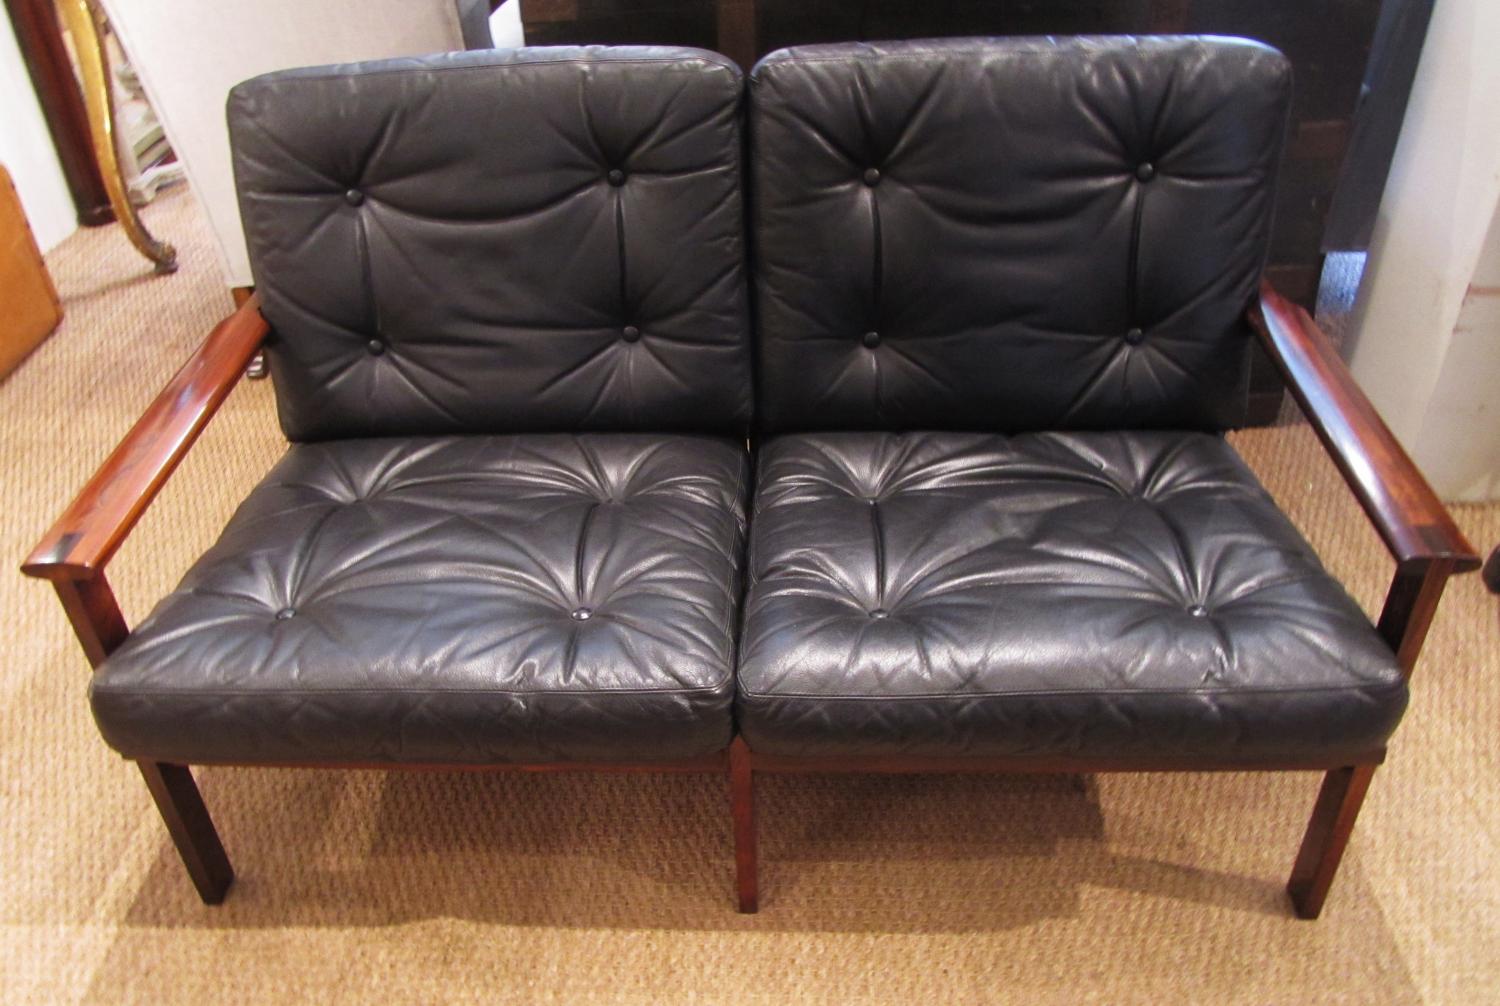 A two seat leather sofa